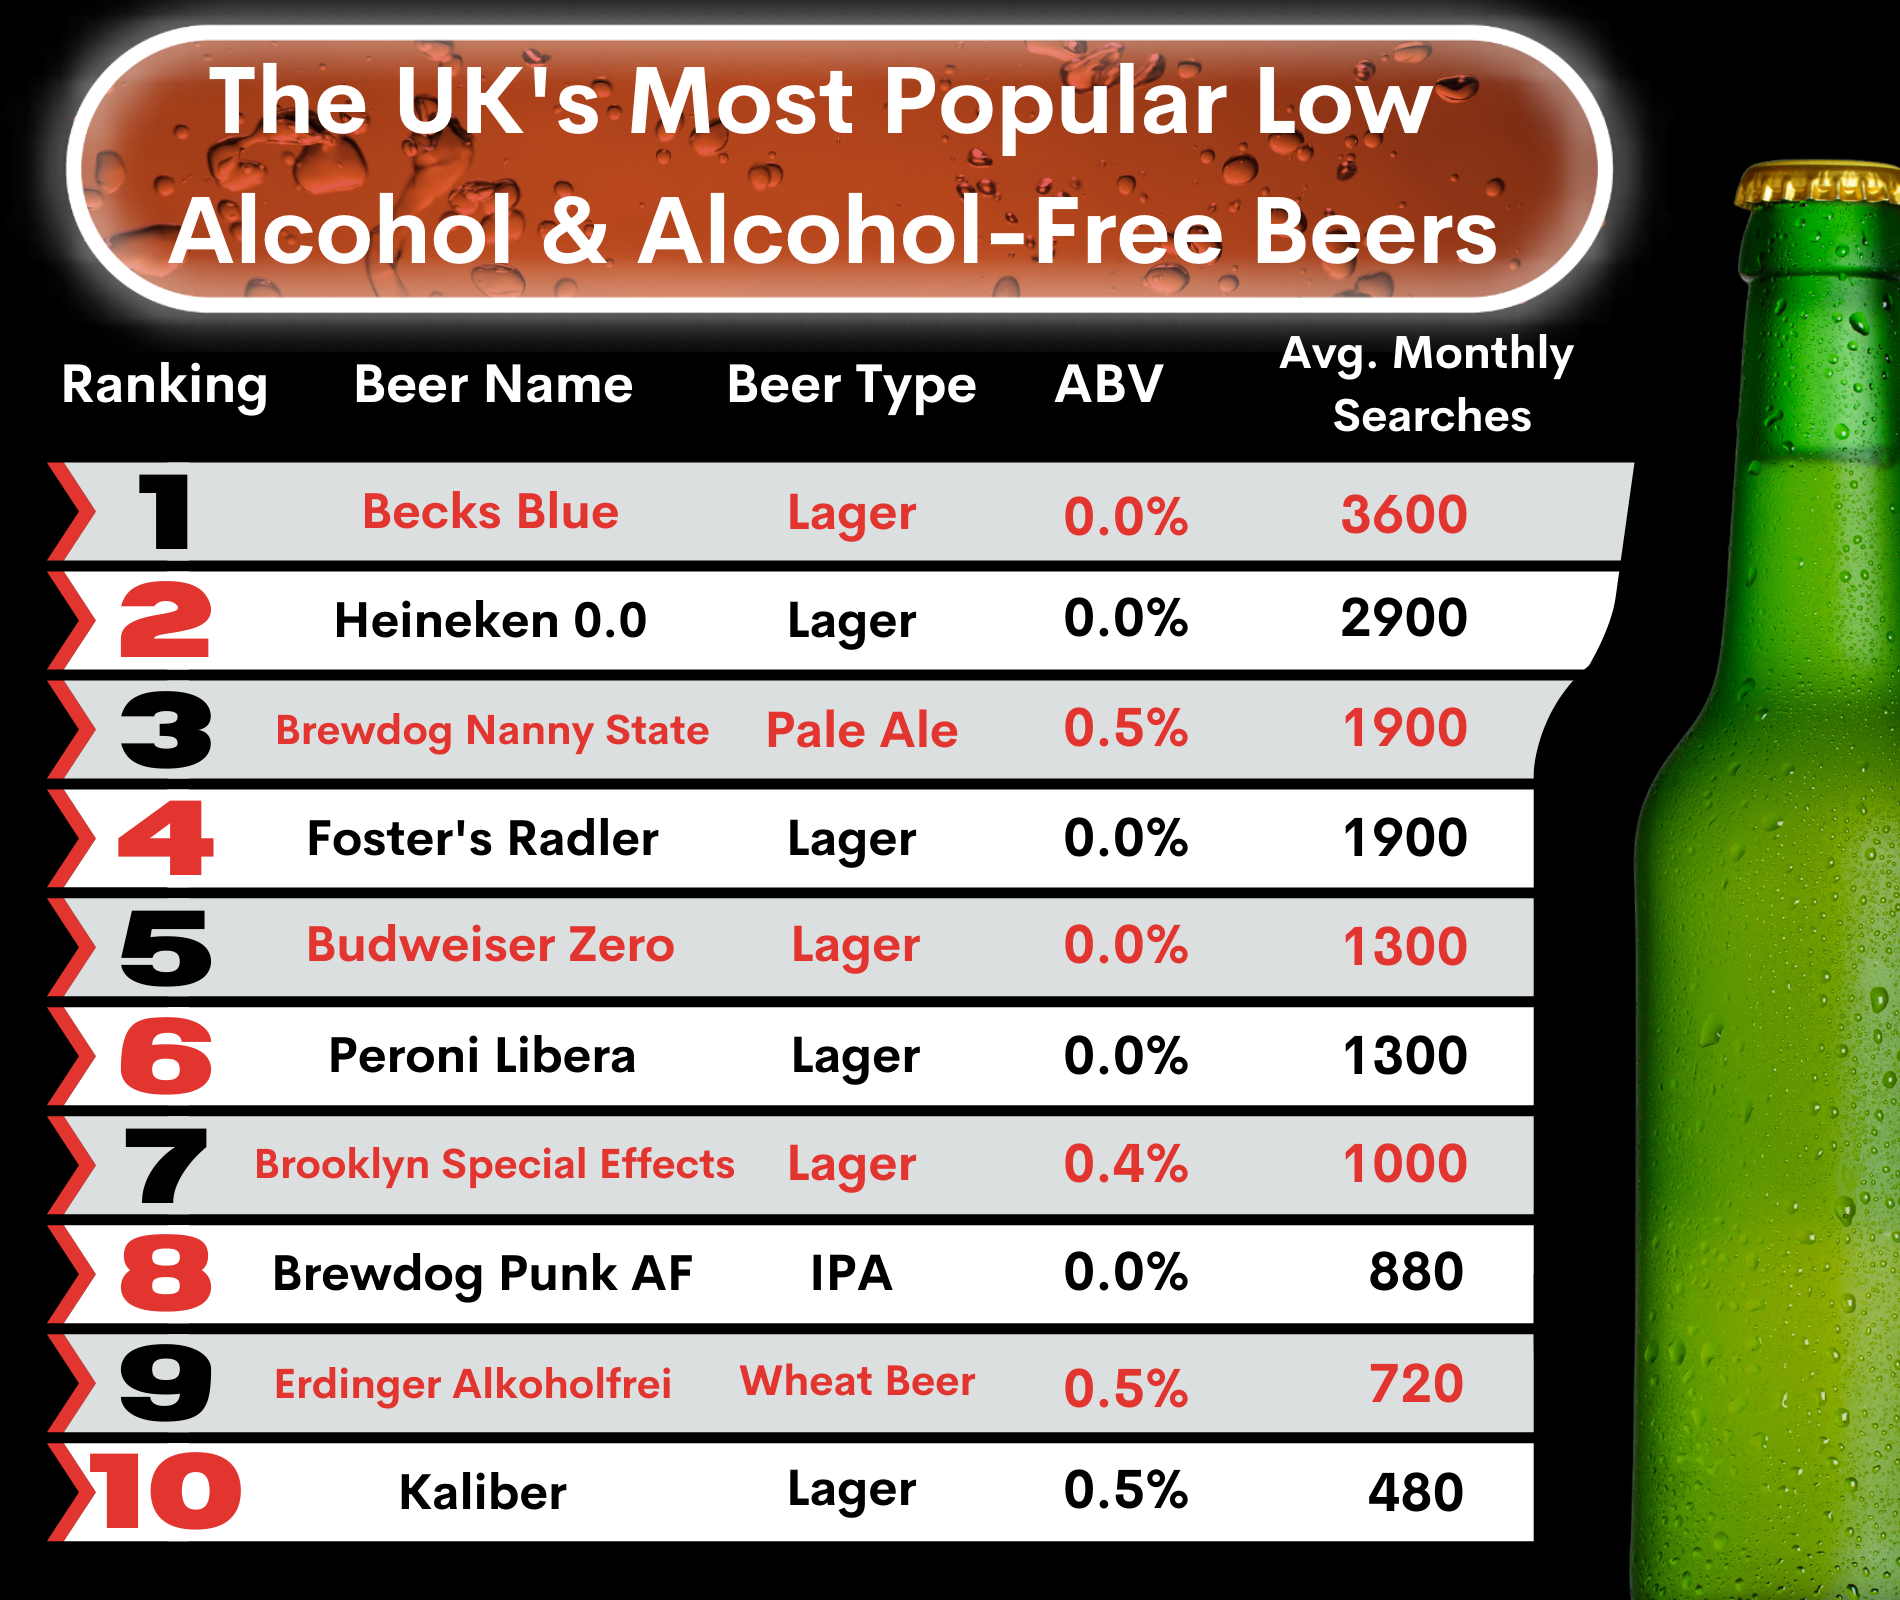 The UK’s Most Popular Low Alcohol and Non-Alcoholic Beers Index